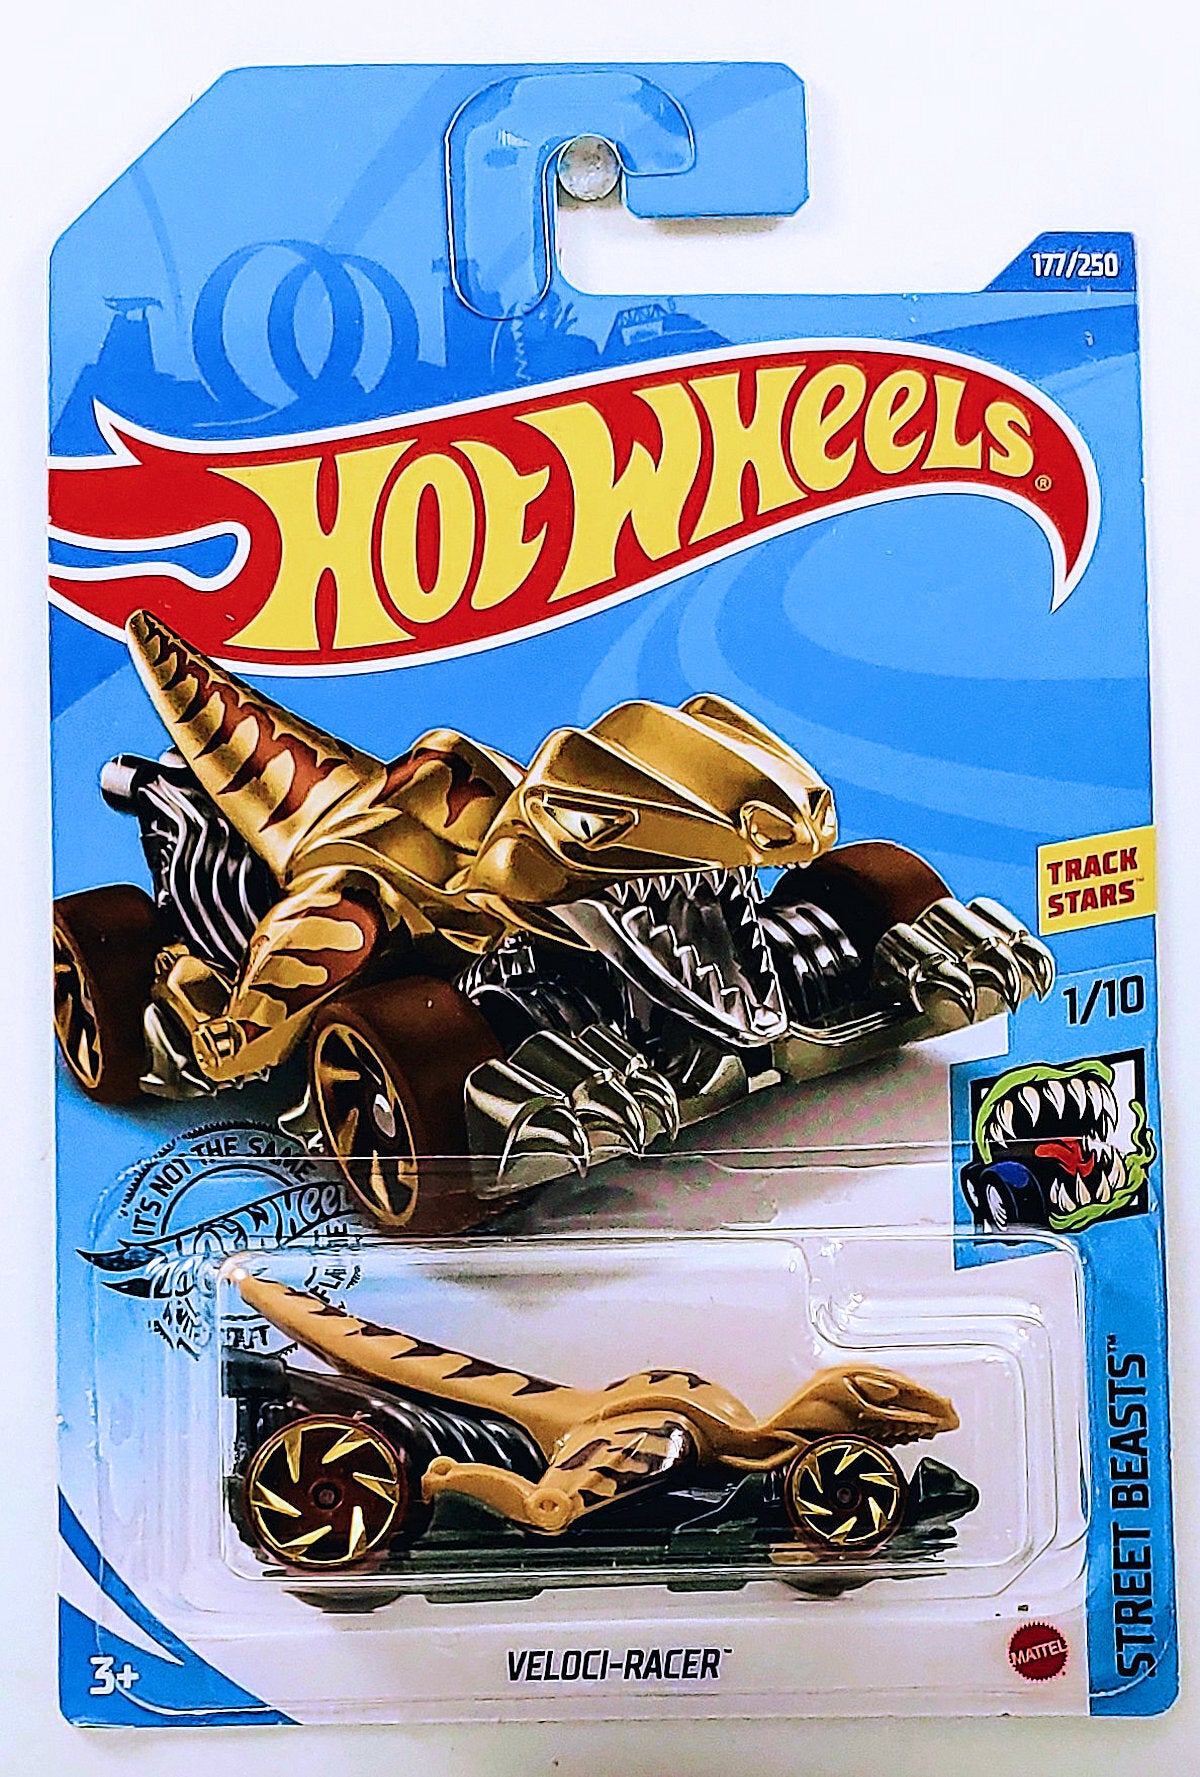 Hot Wheels 2020 - Collector # 177/250 - Street Beasts 1/10 - New Models - Veloci-Racer - Tan - IC